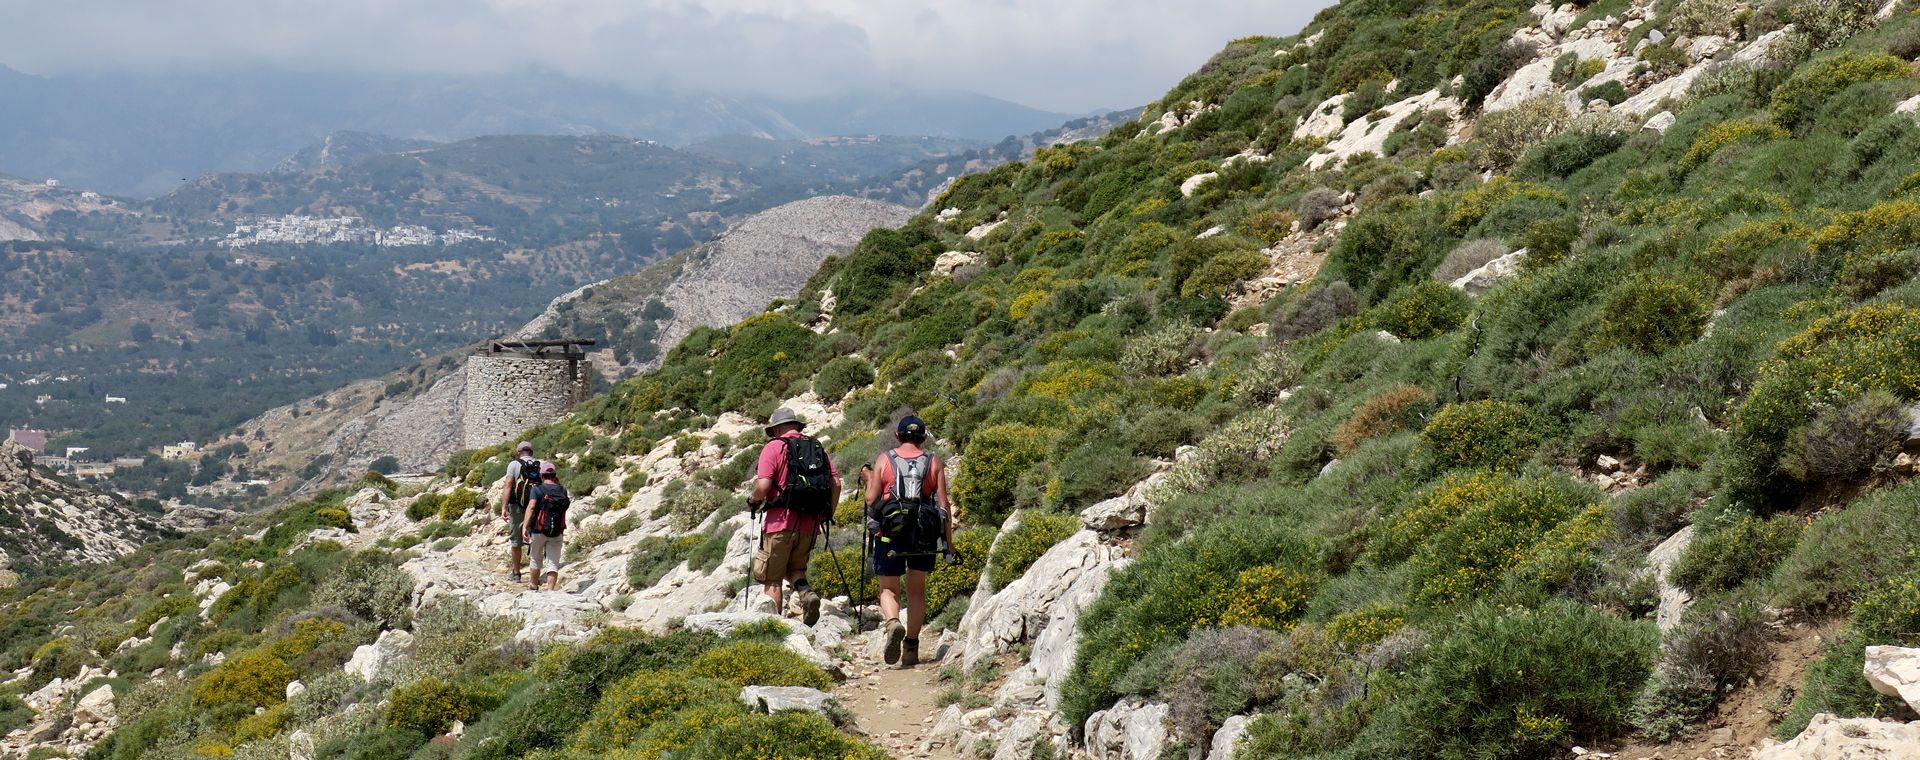 Guided hike on the island of Naxos